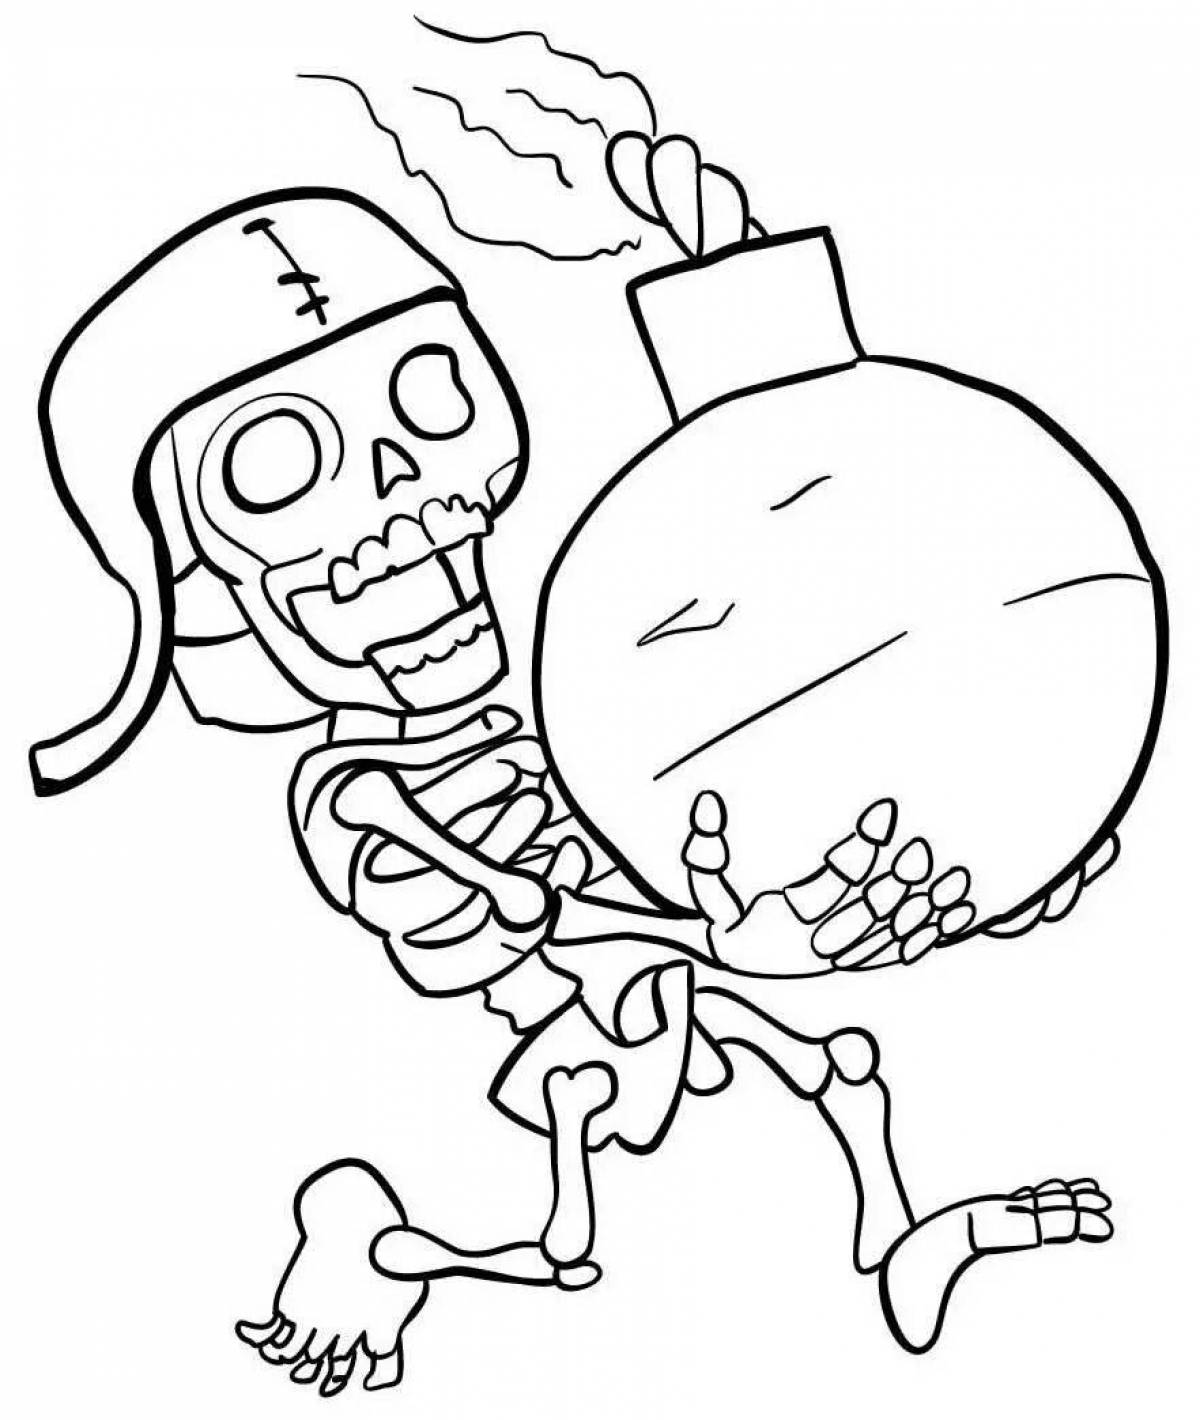 Exciting clash of clans coloring book